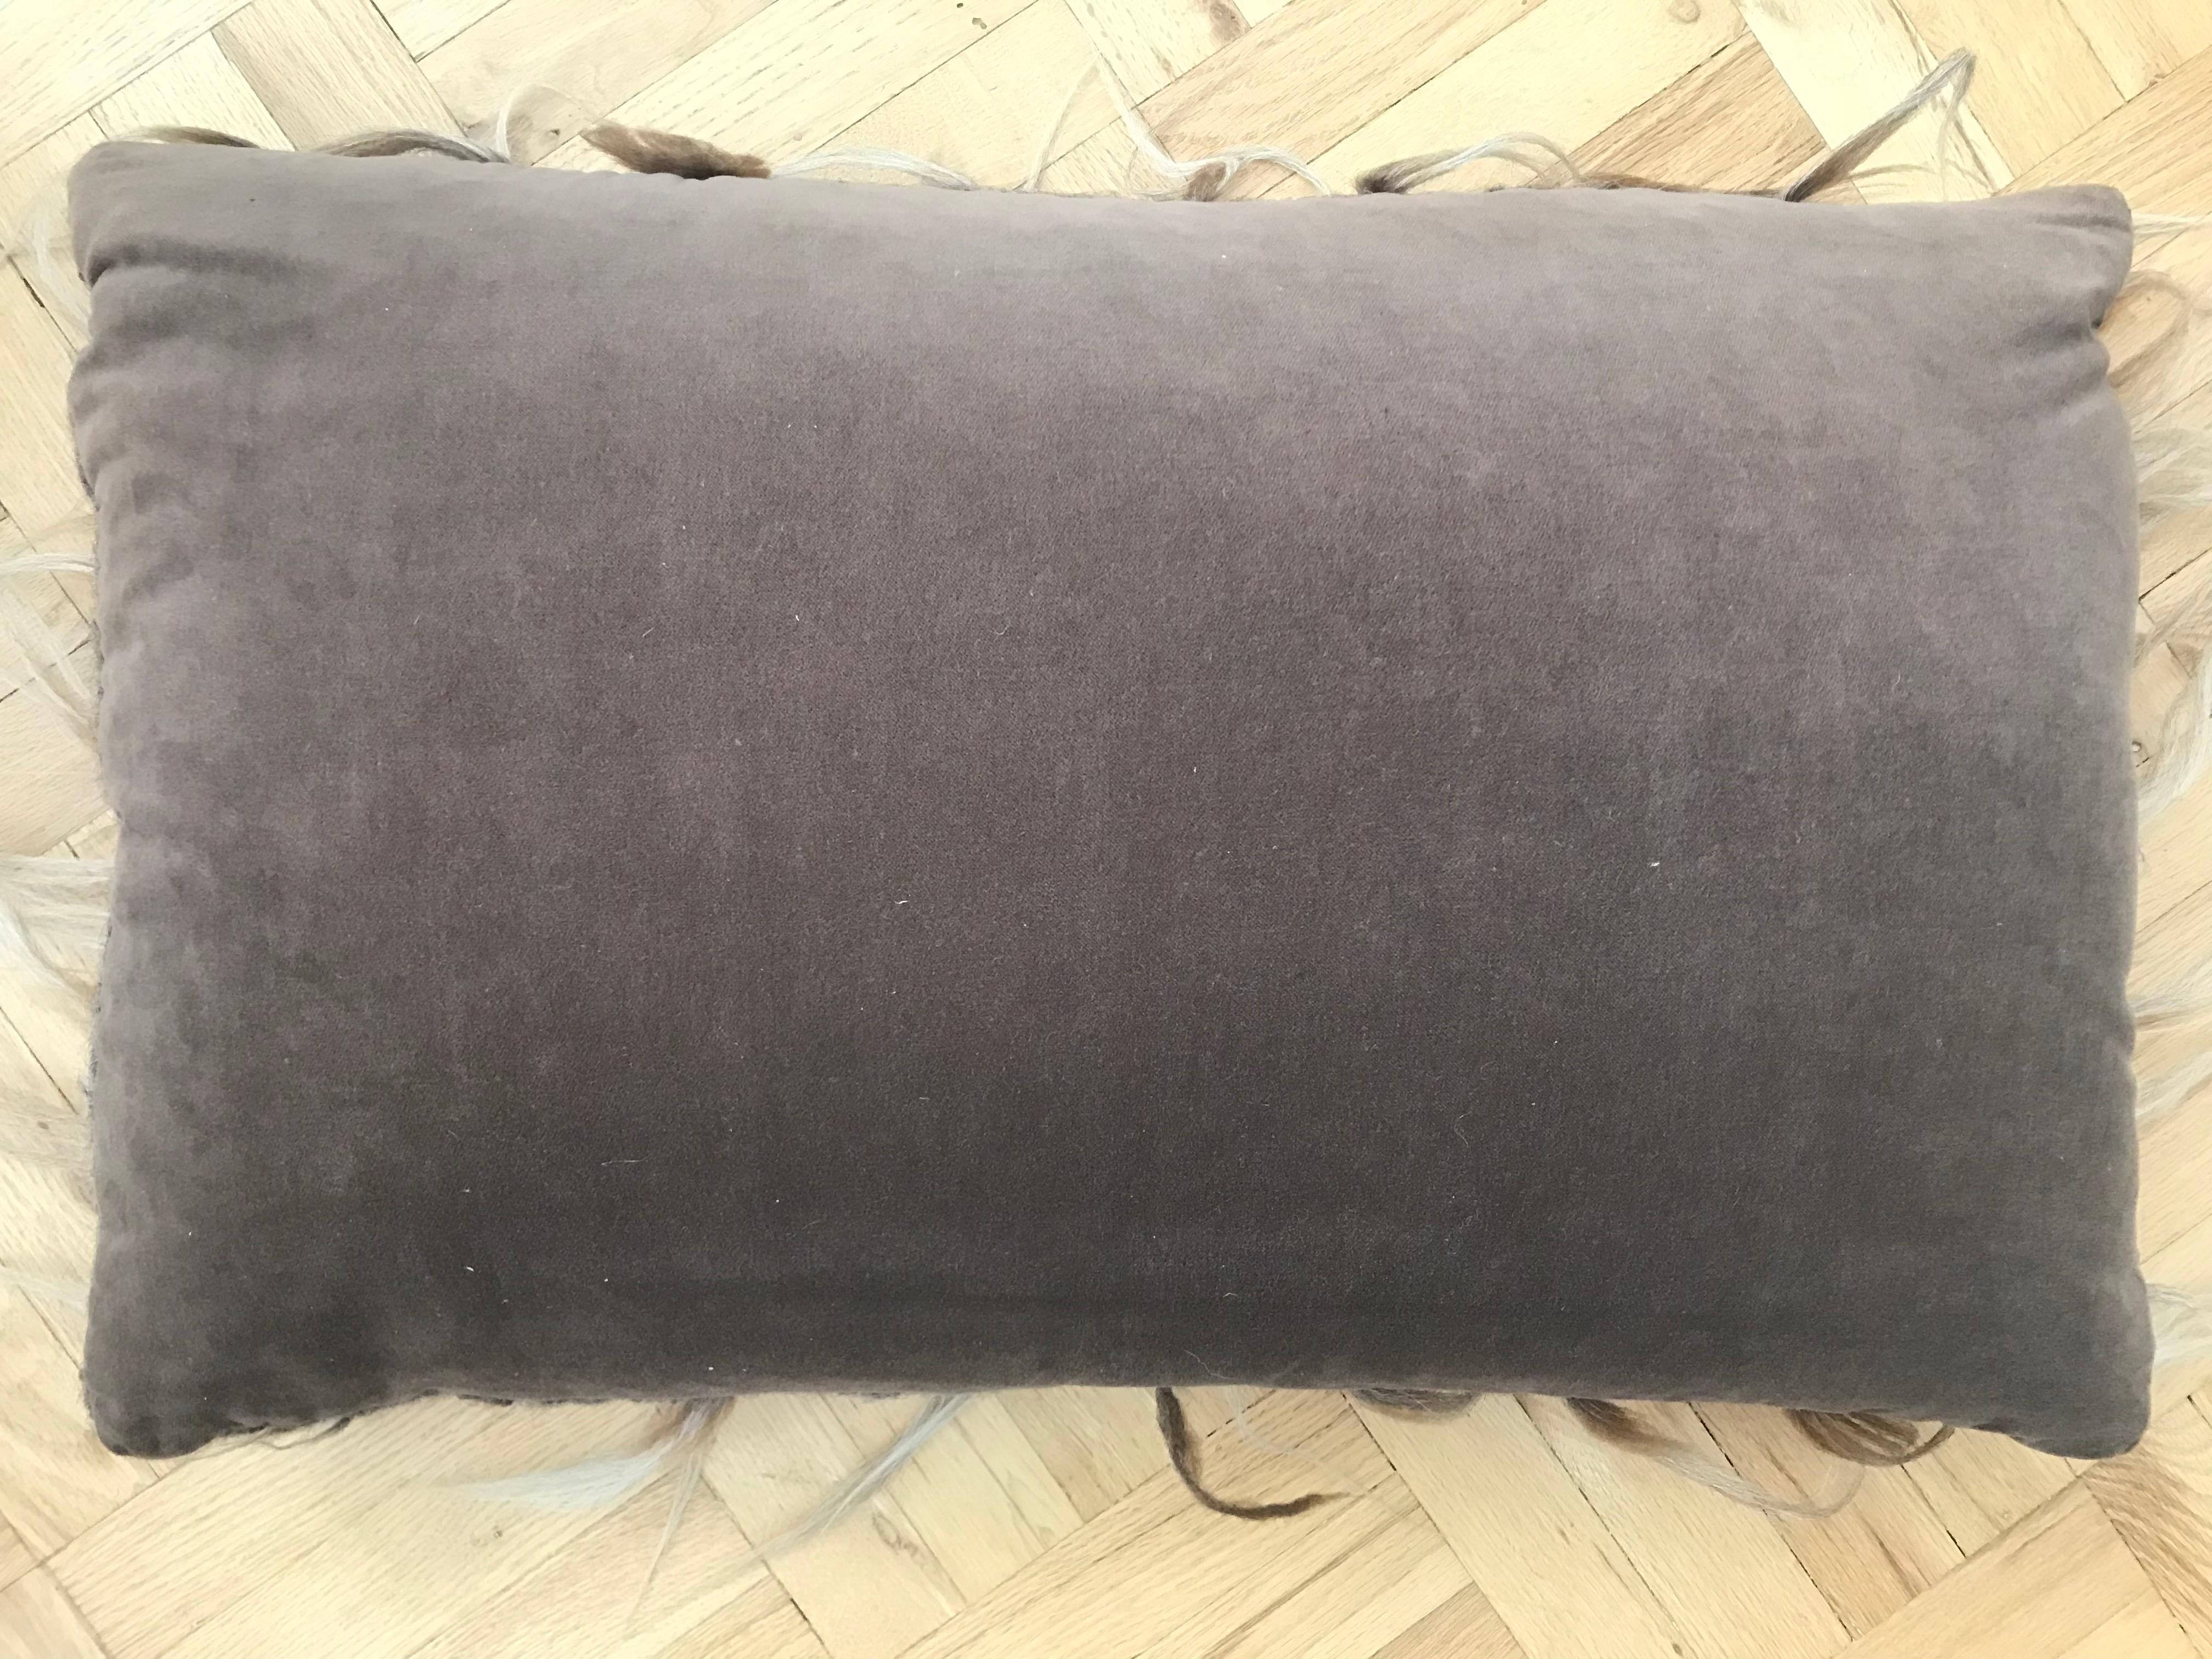 Romanian Brown 'Trousseau' Handwoven Felted Organic Wool Pillow For Sale